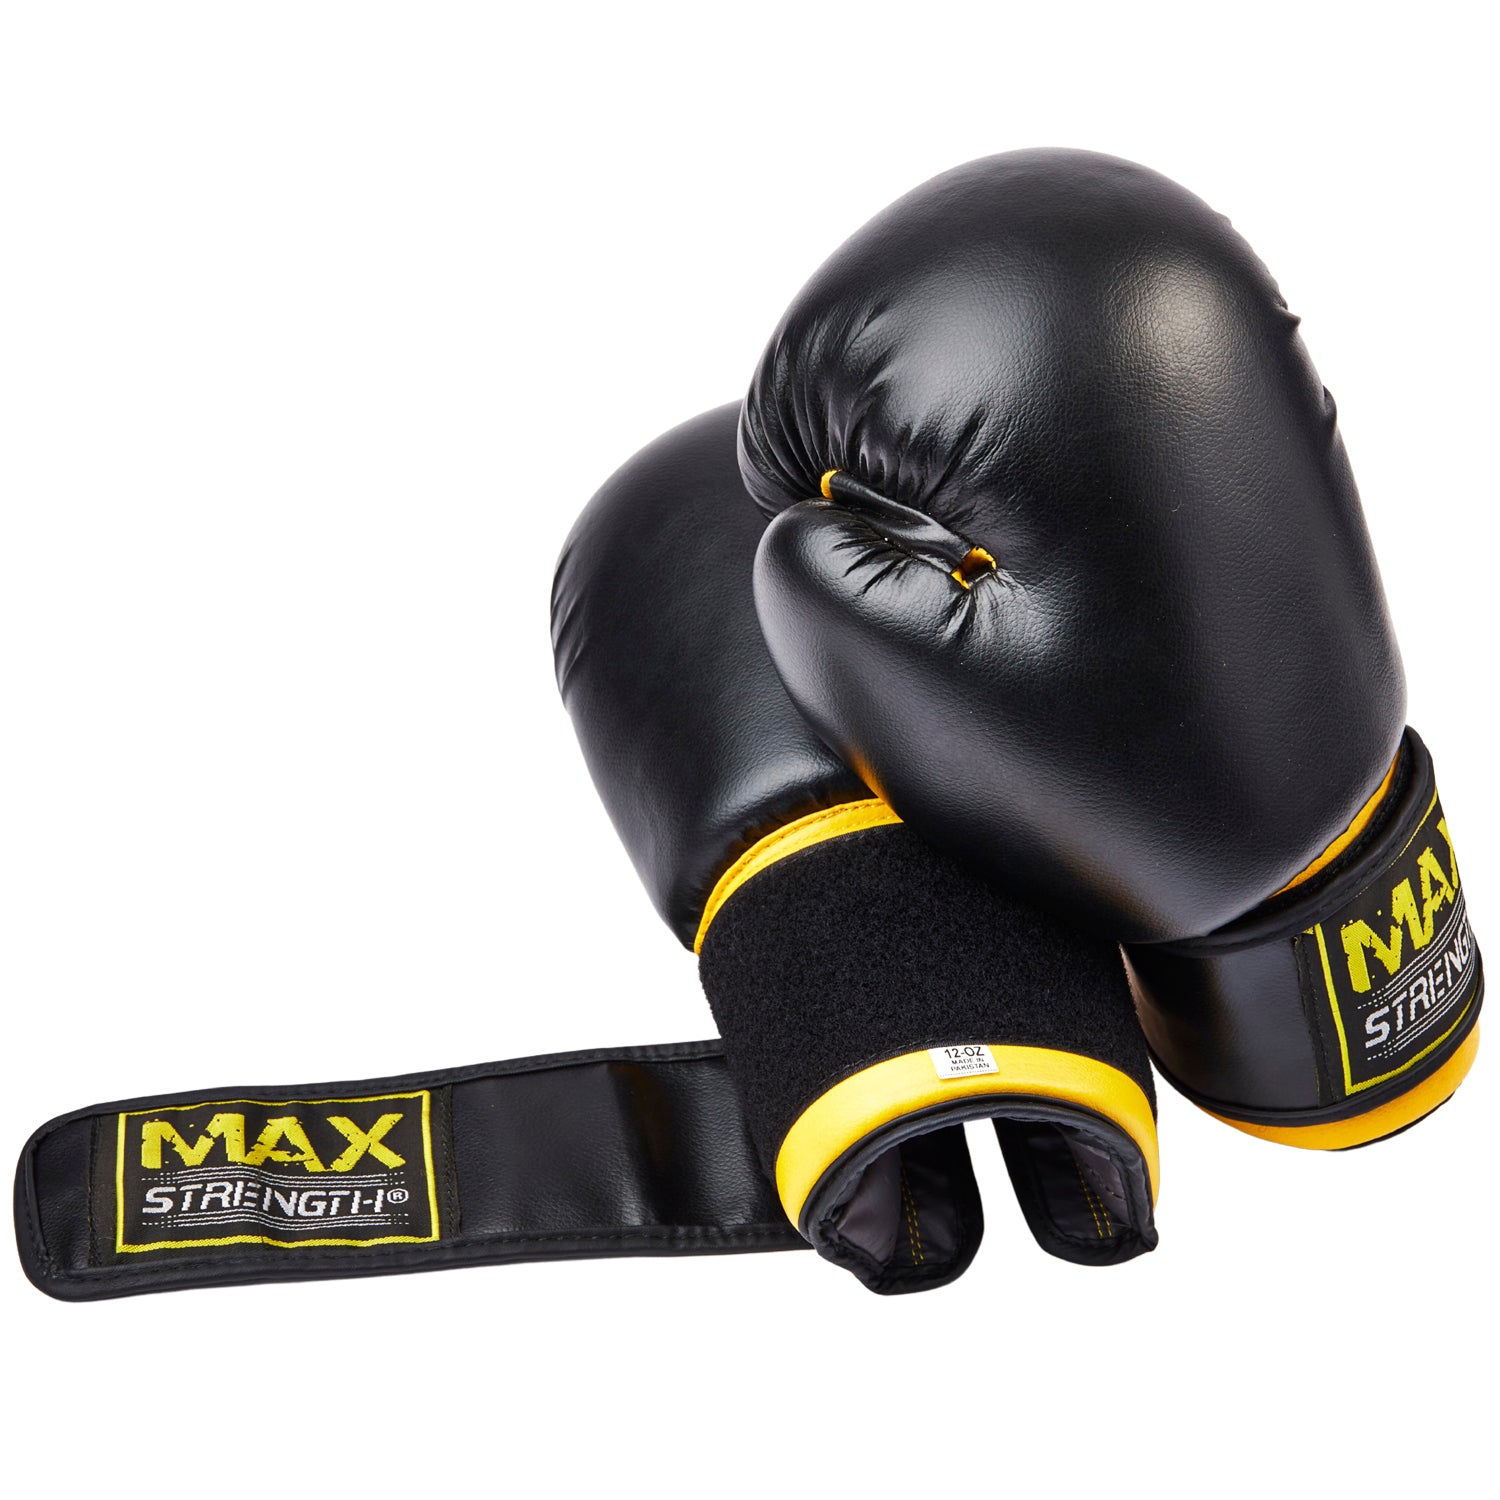 Rex Leather Boxing gloves 